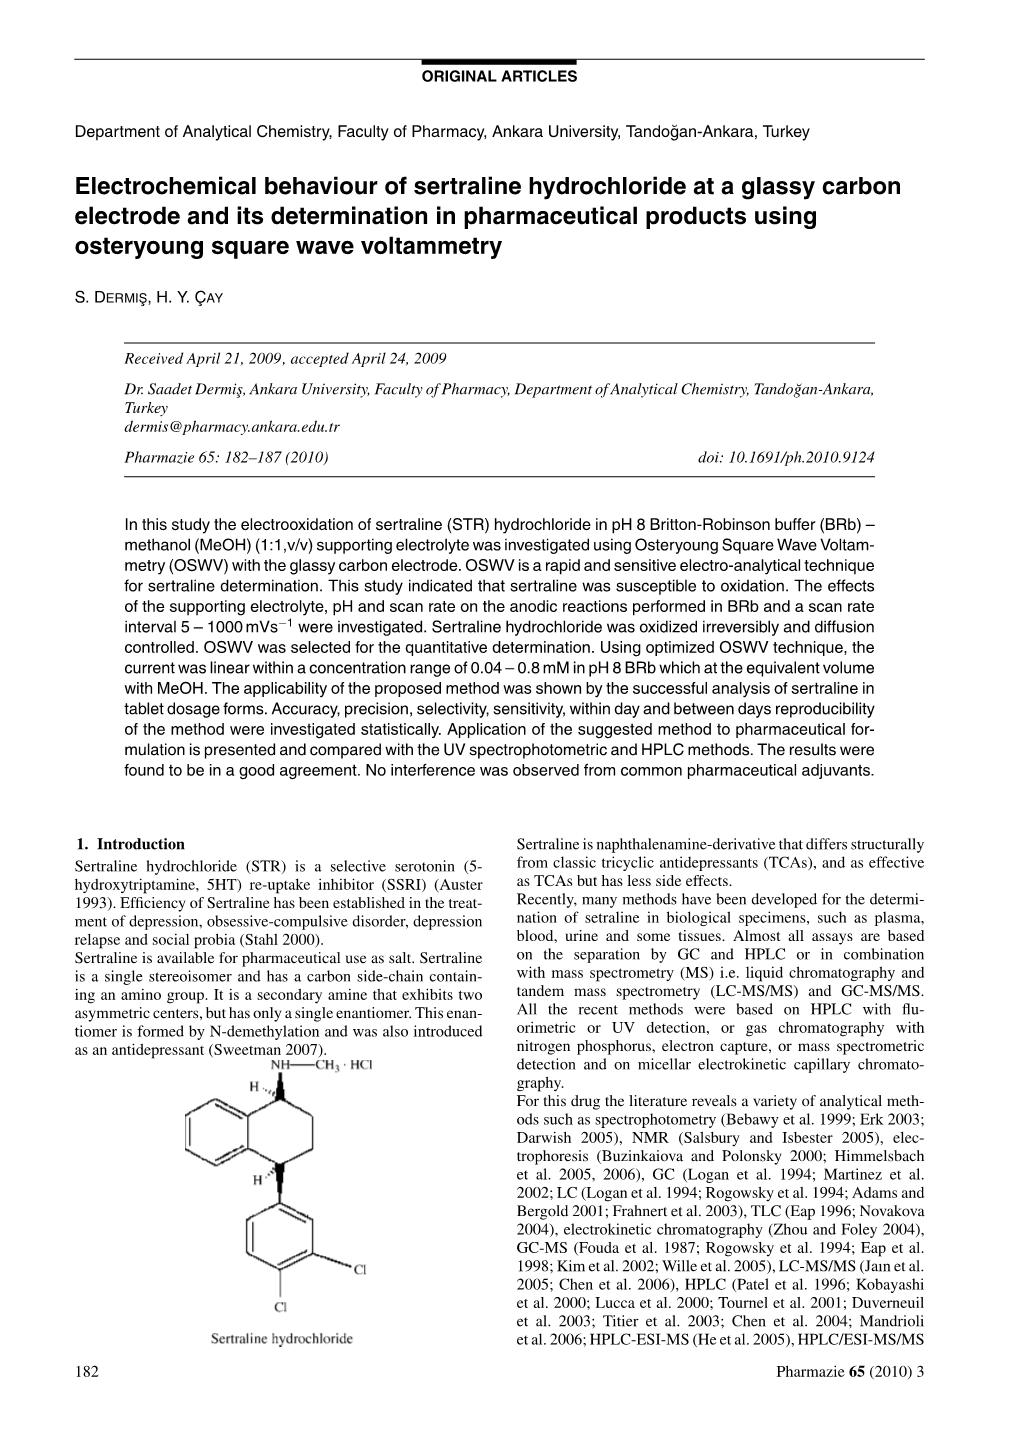 Electrochemical Behaviour of Sertraline Hydrochloride at a Glassy